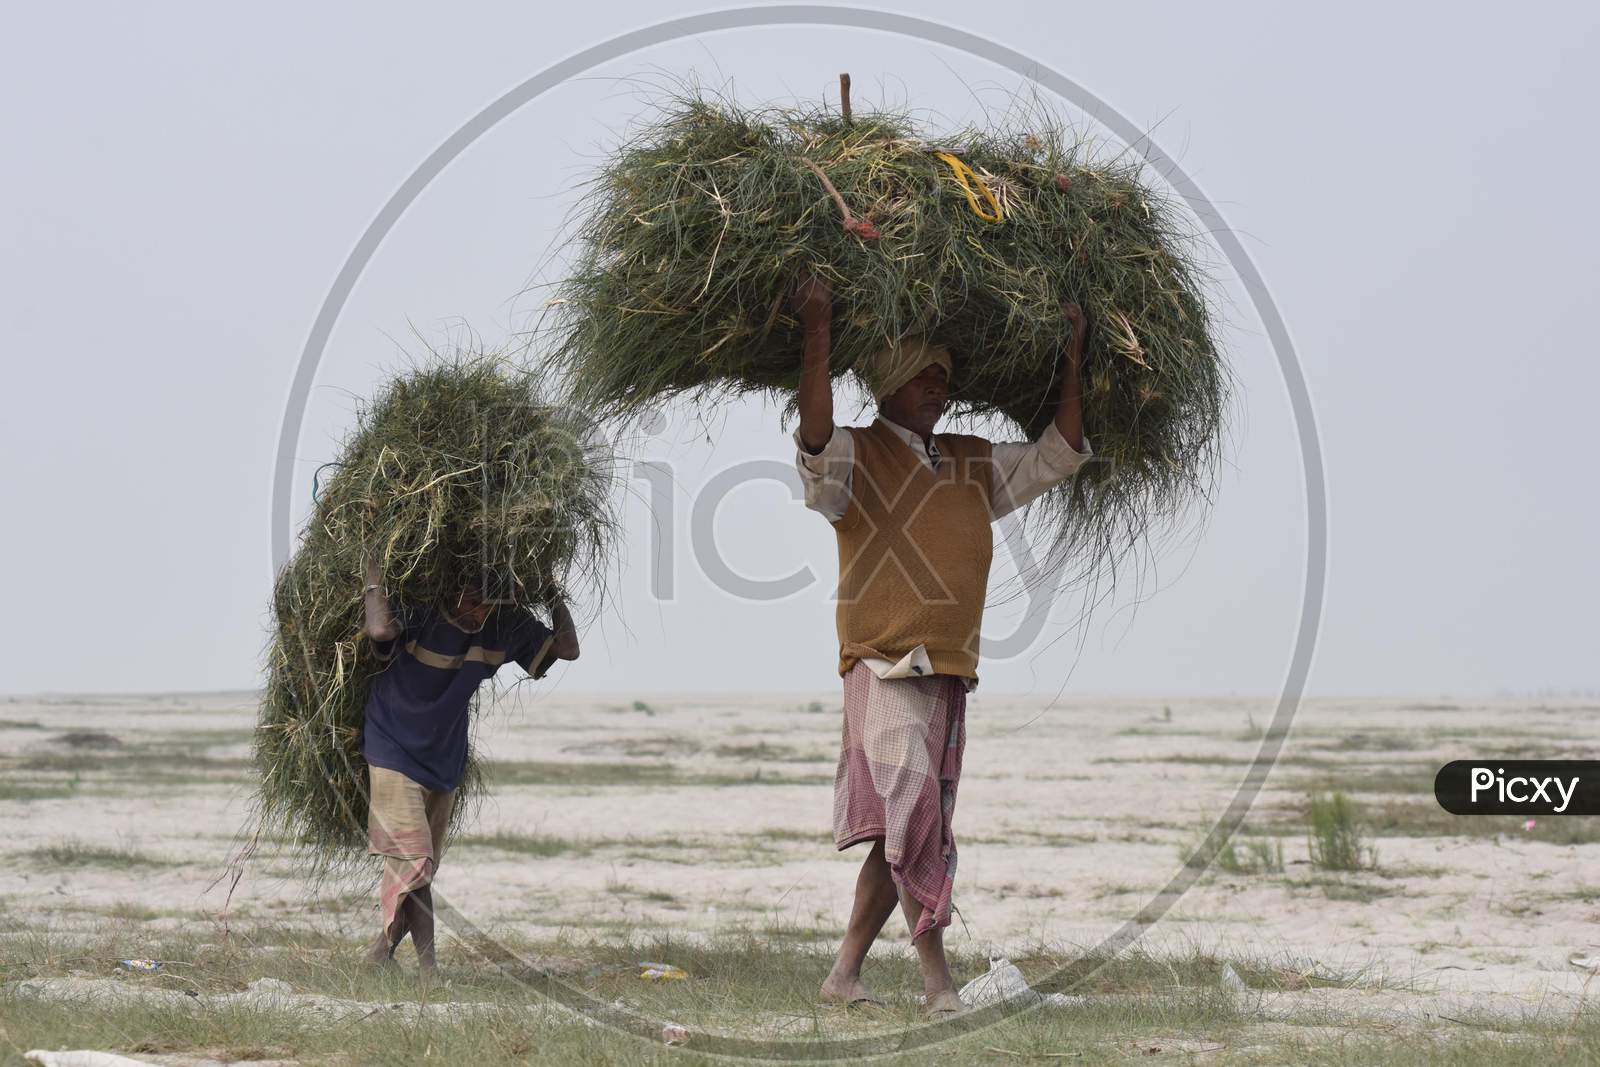 A man carries grass to feed his cattle, on the banks of the river Brahmaputra in Guwahati